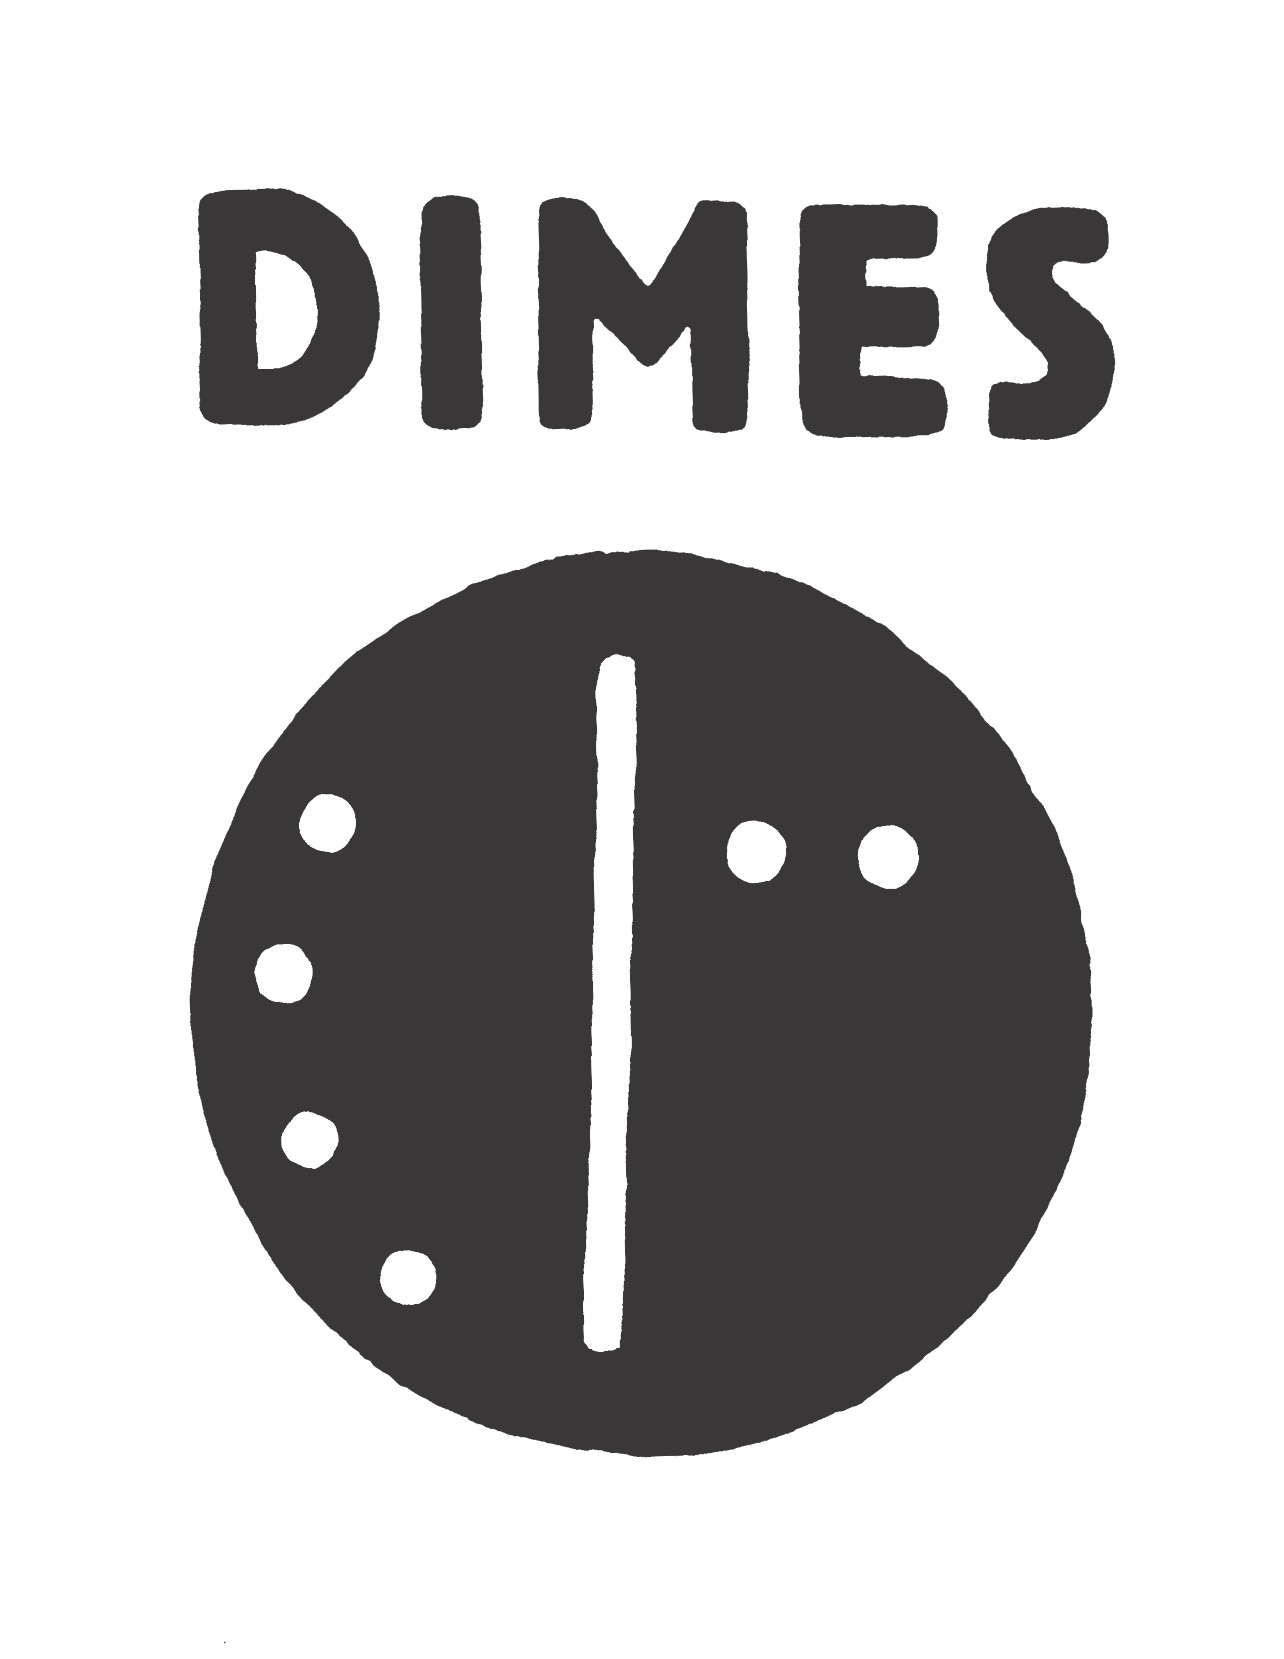 Episode 29: Alissa Wagner and Sabrina De Sousa, Co-Founders of Dimes